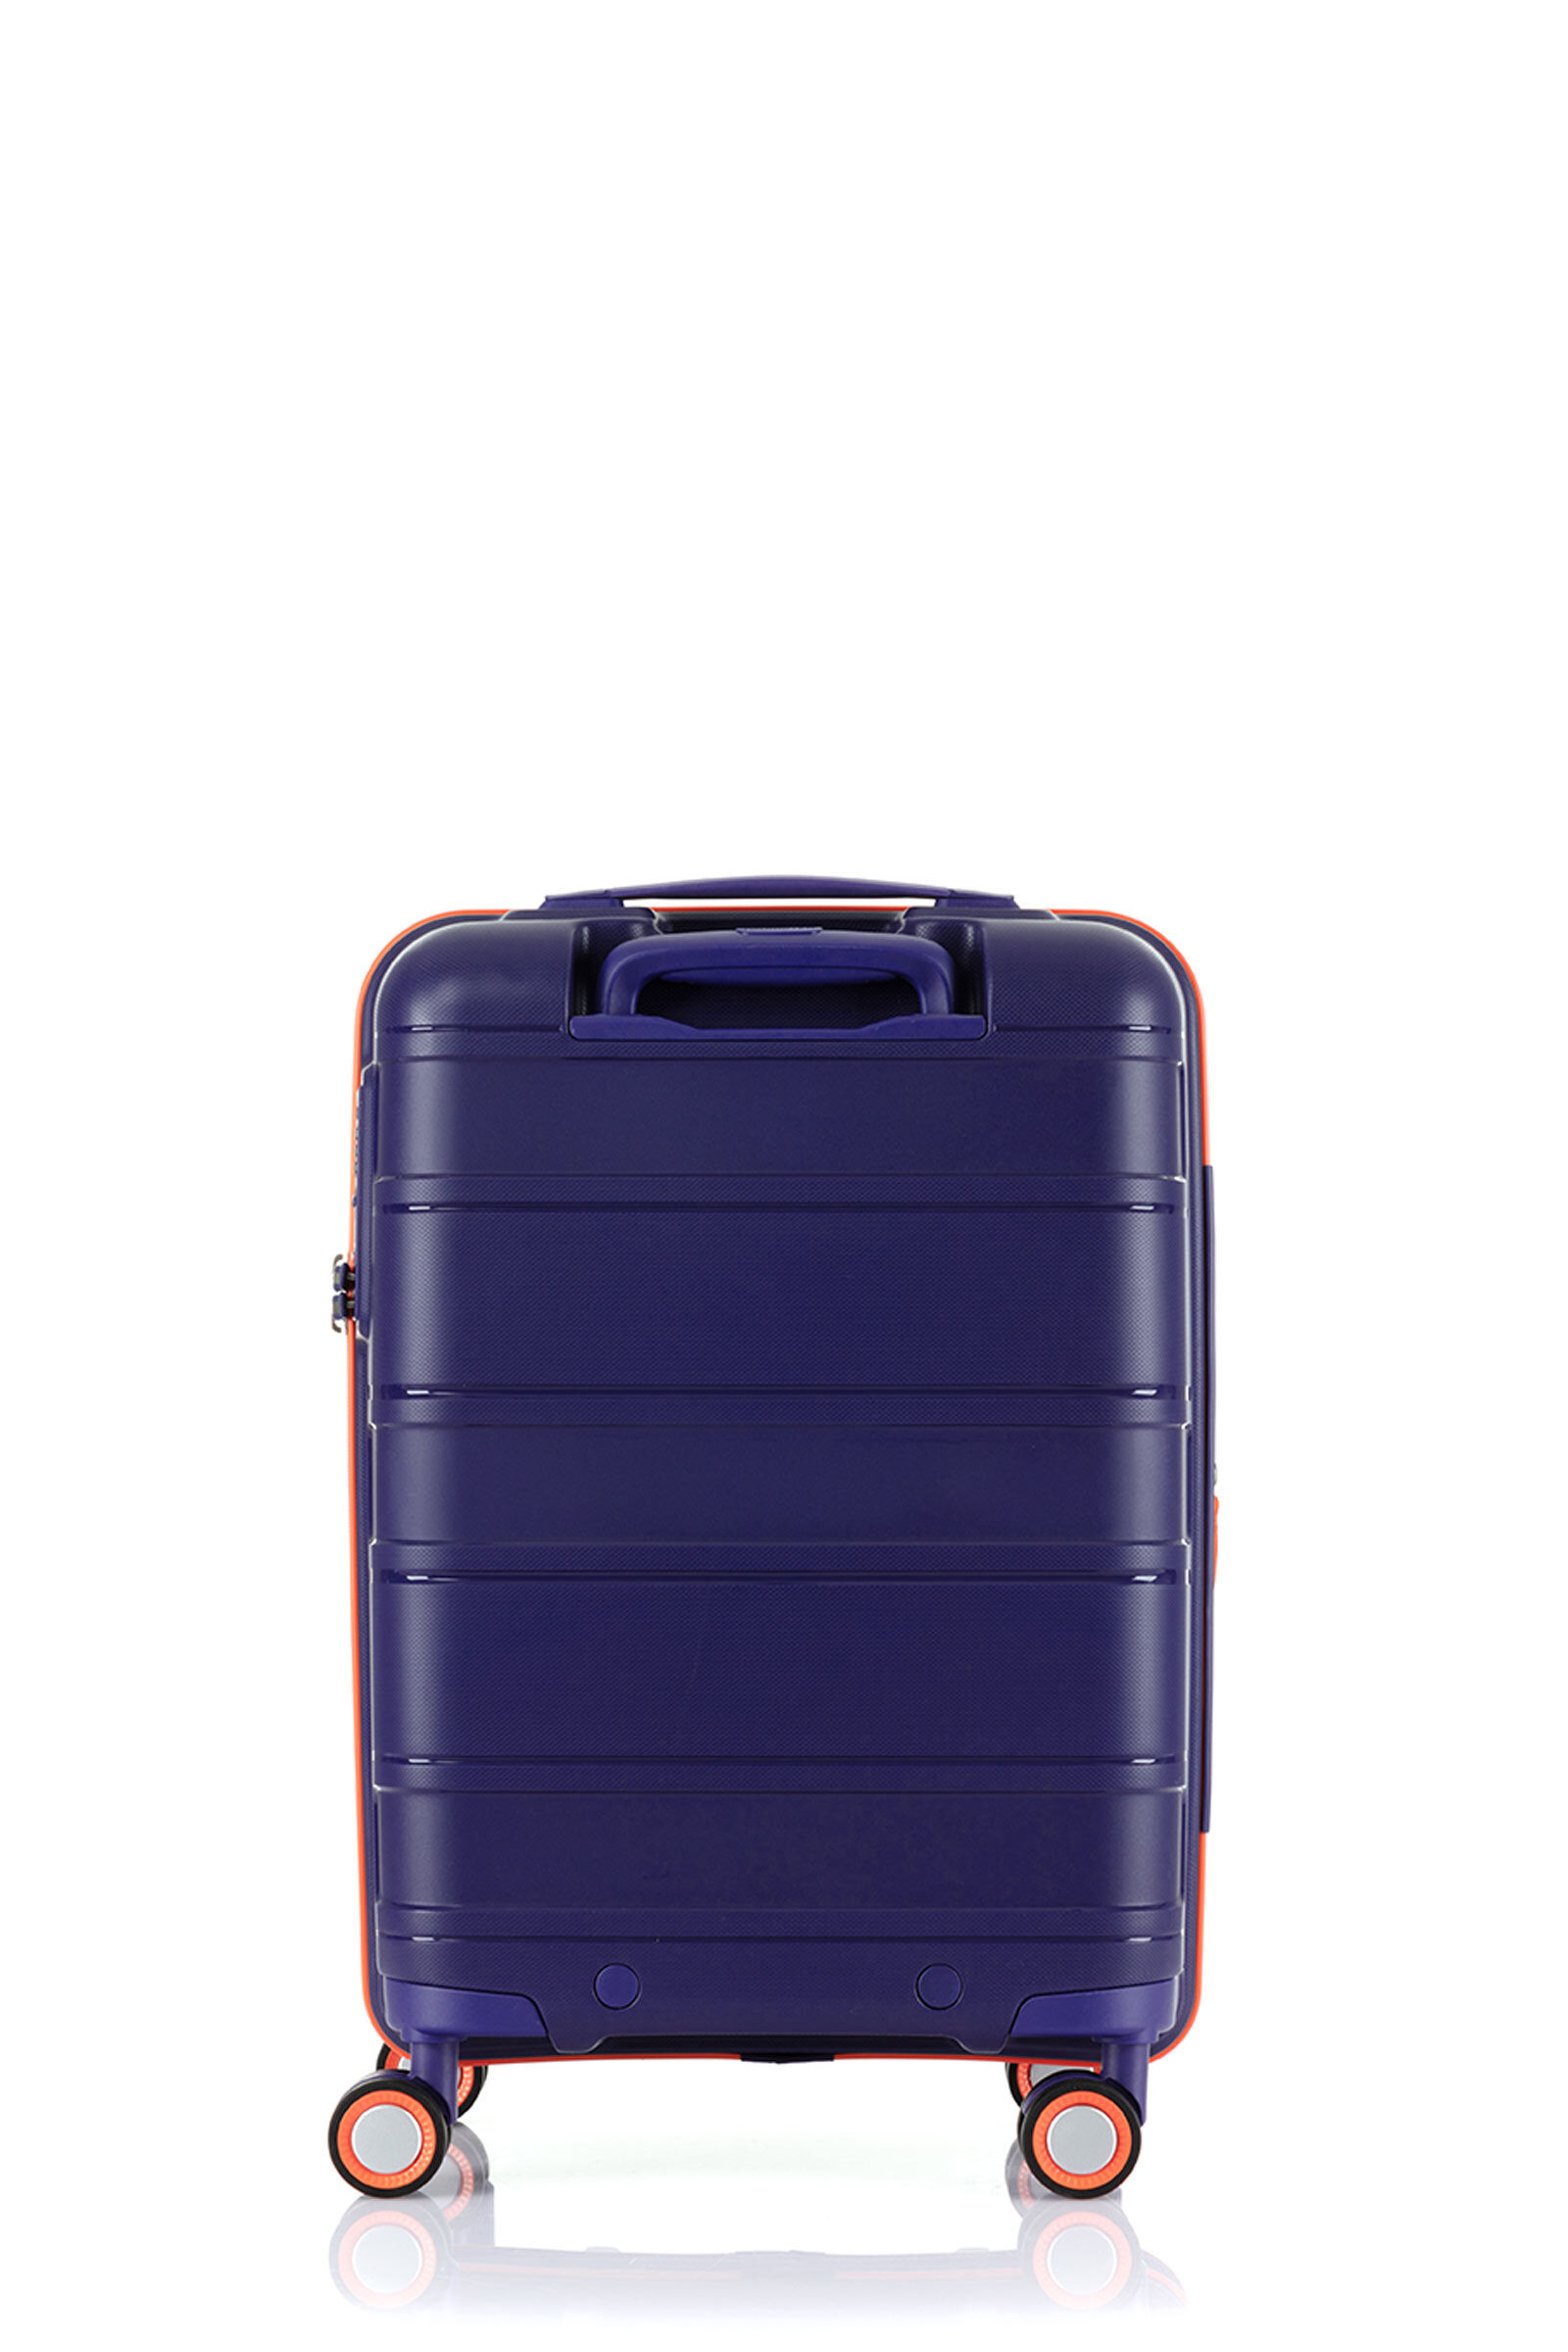 American Tourister Spinner 55 cm EXP Litewing Poliestere